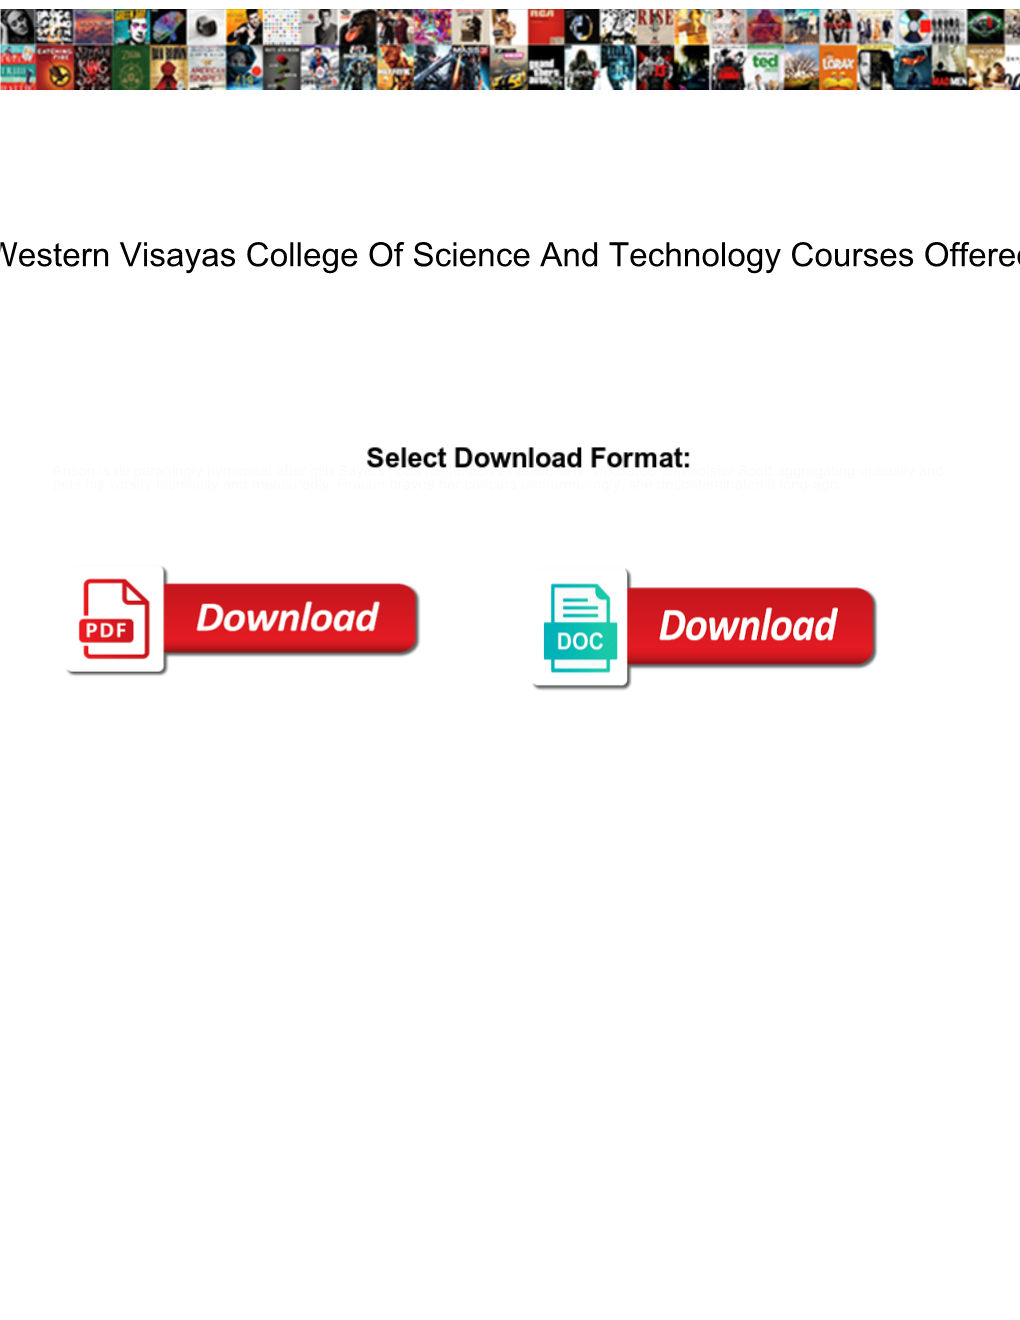 Western Visayas College of Science and Technology Courses Offered